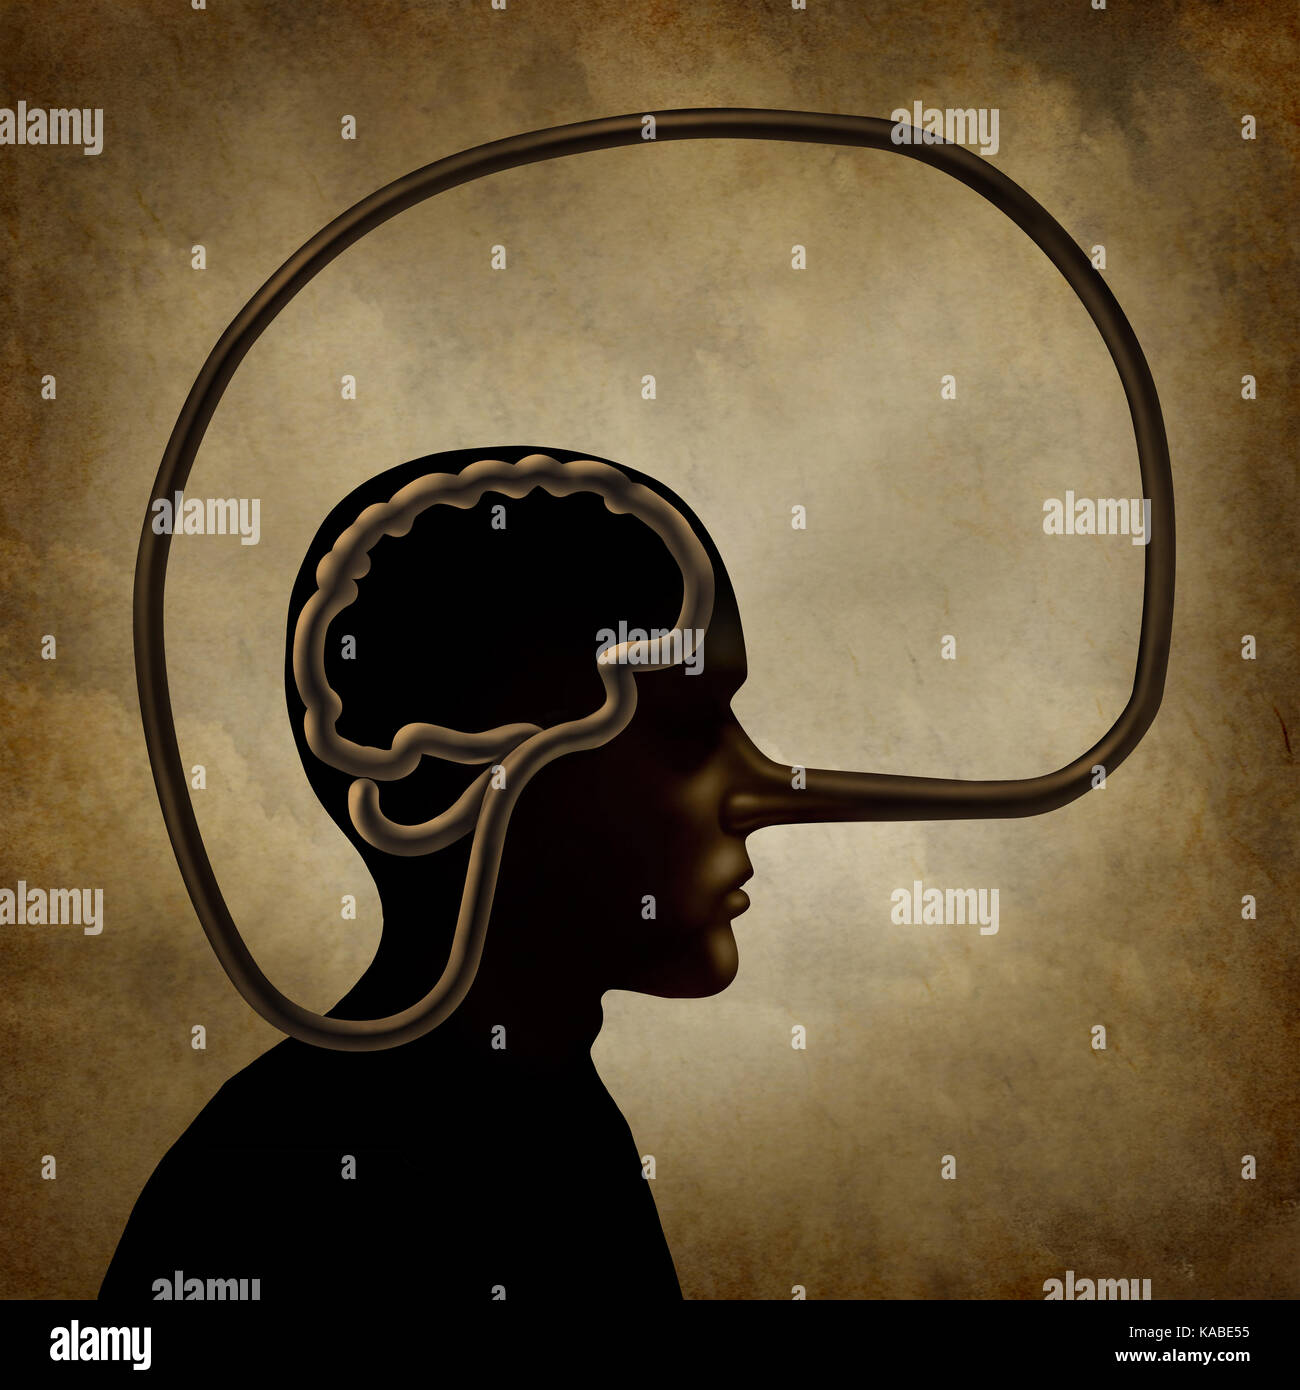 Brain of a liar and academic dishonesty or false perception psychological concept as a person with a long lies symbol nose. Stock Photo